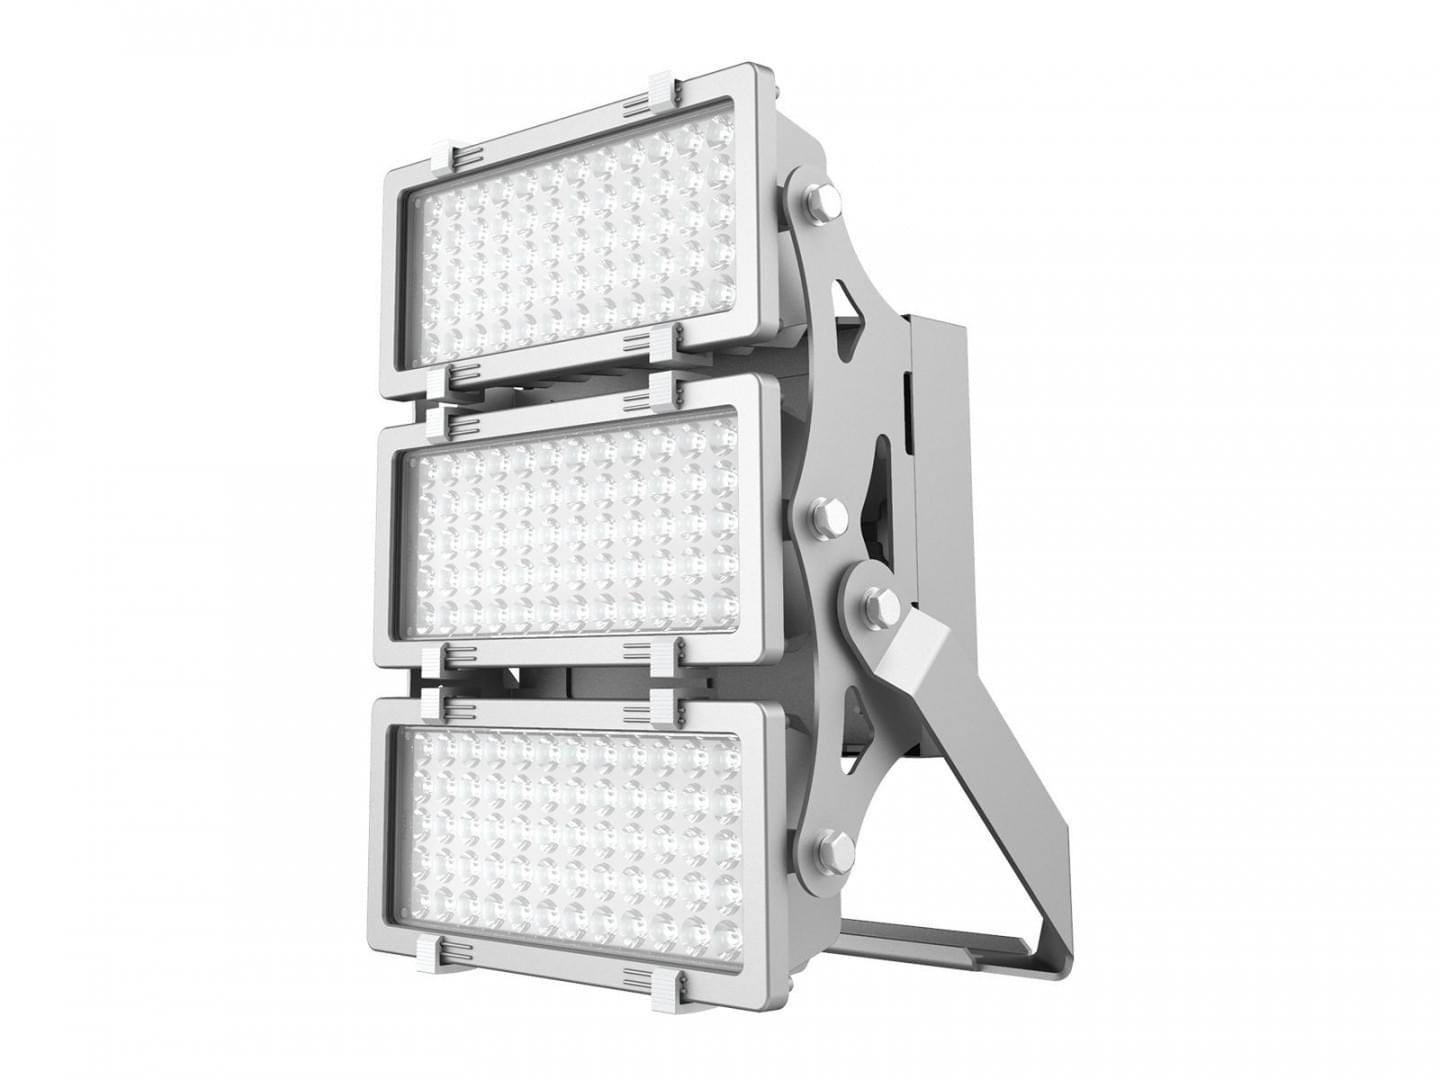 High Power Flood Light NLFL13 Series from NIE Electronics